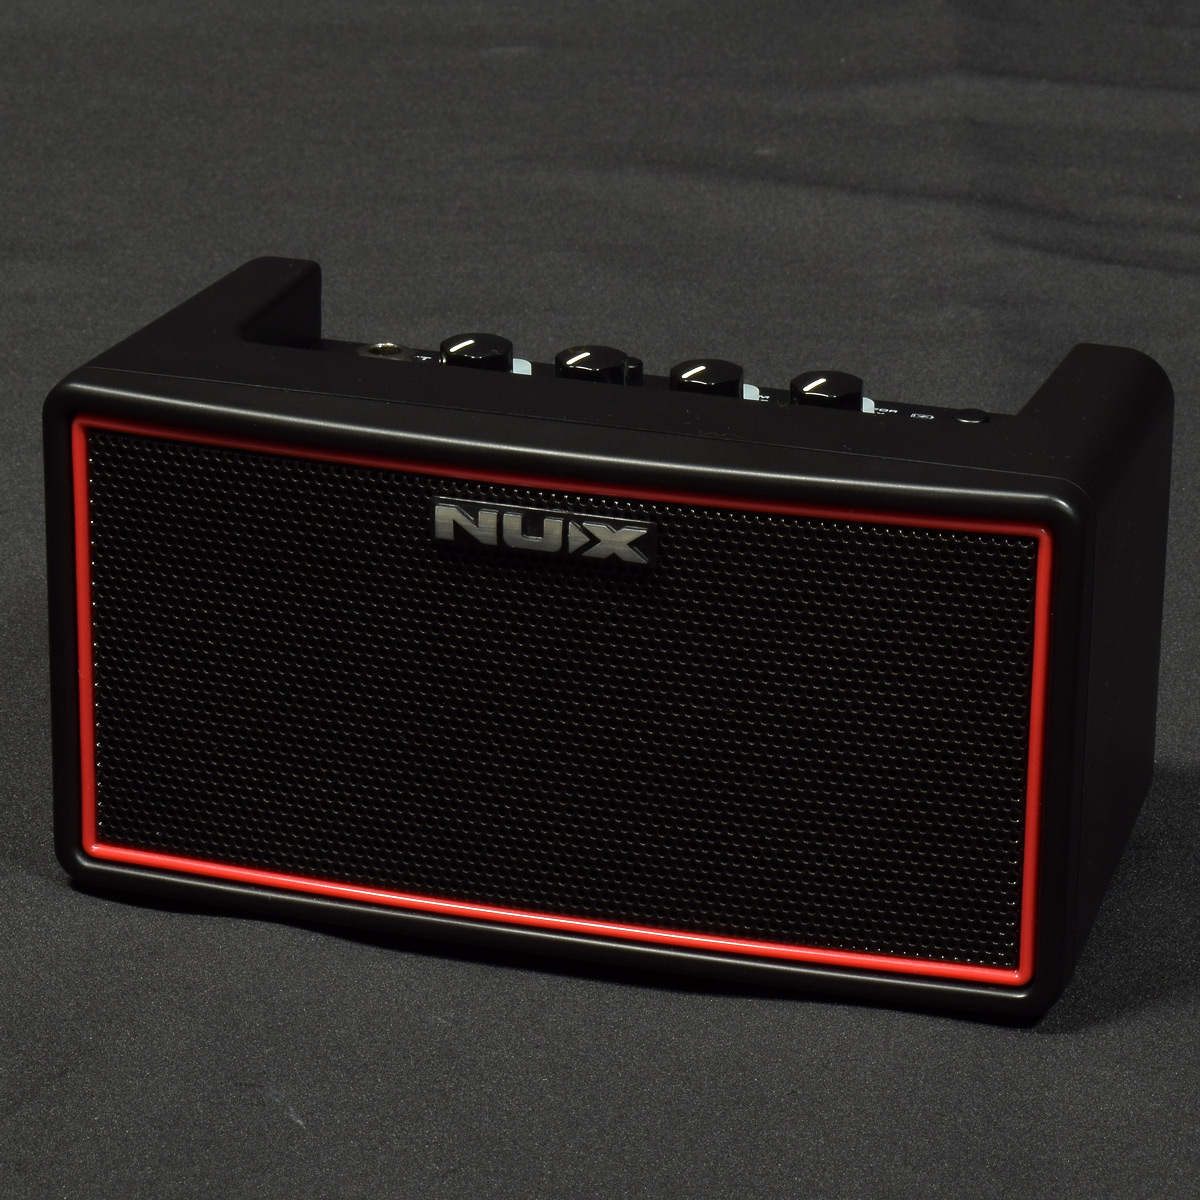 Stereo　Amplifier　Air　イシバシ楽器　中古】NUX　Modeling　Mighty　Wireless